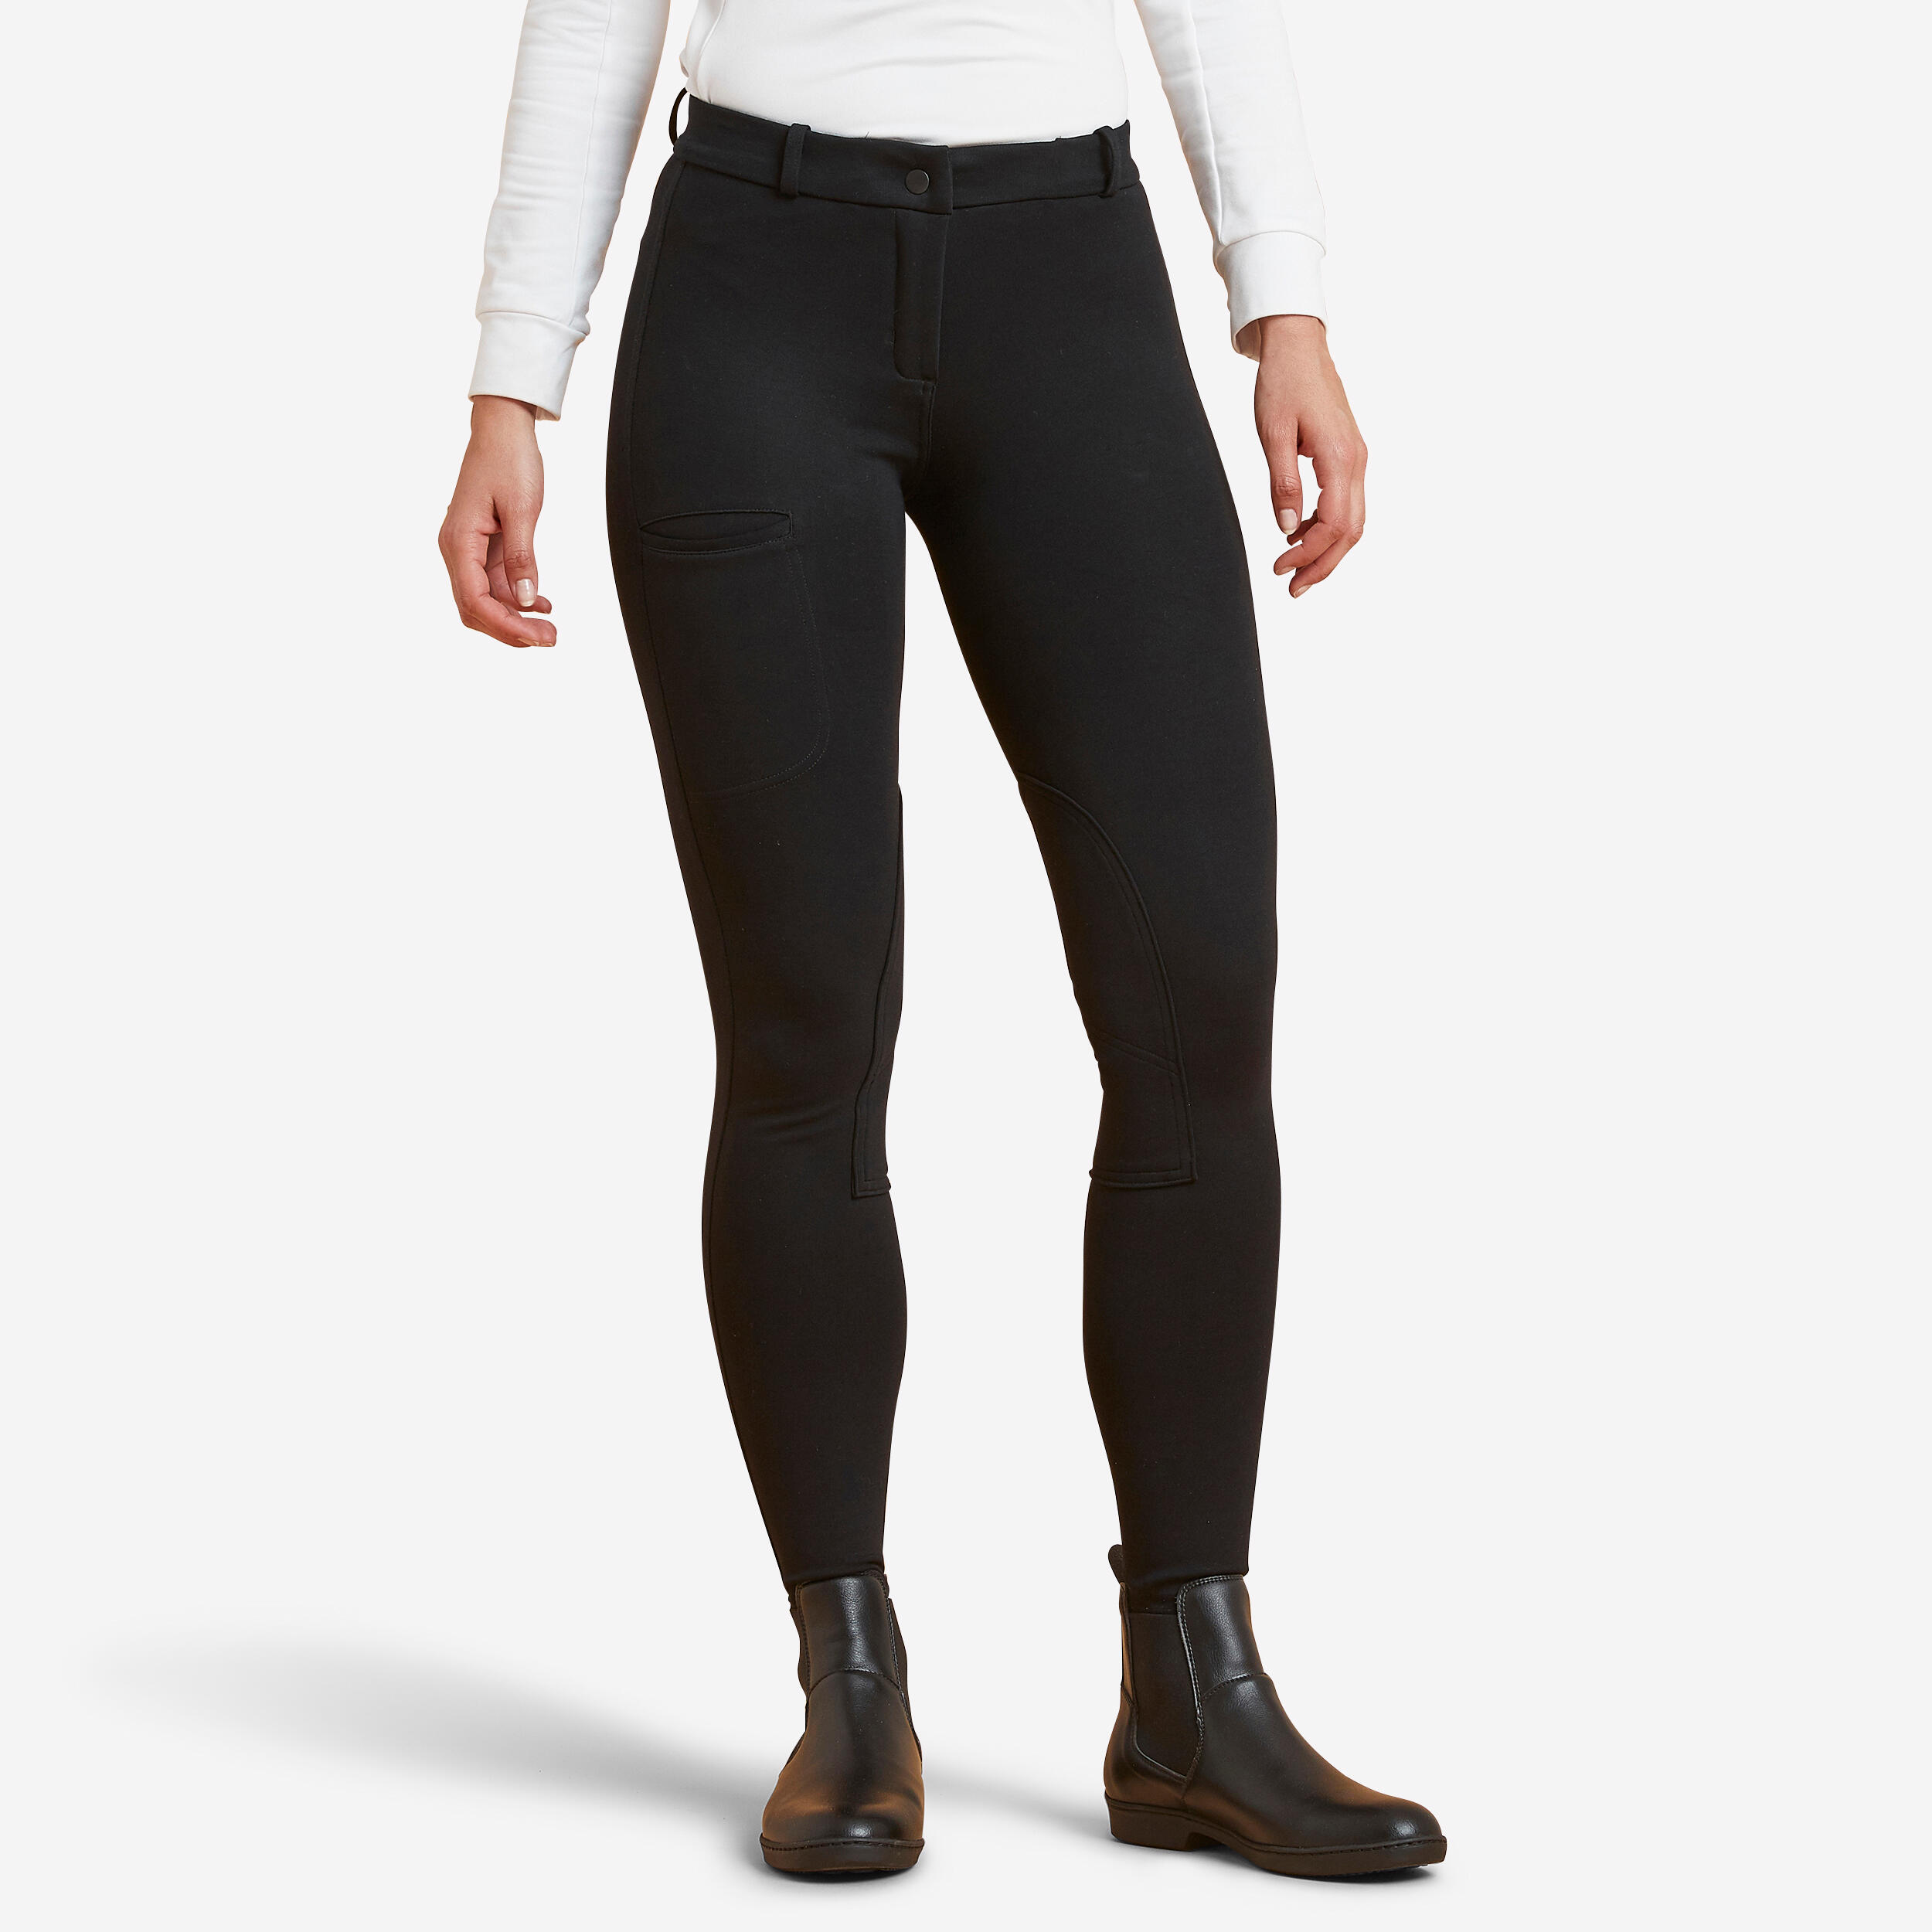 High Waisted Breeches with Phone Pocket, Riding Tights, Jodhpurs